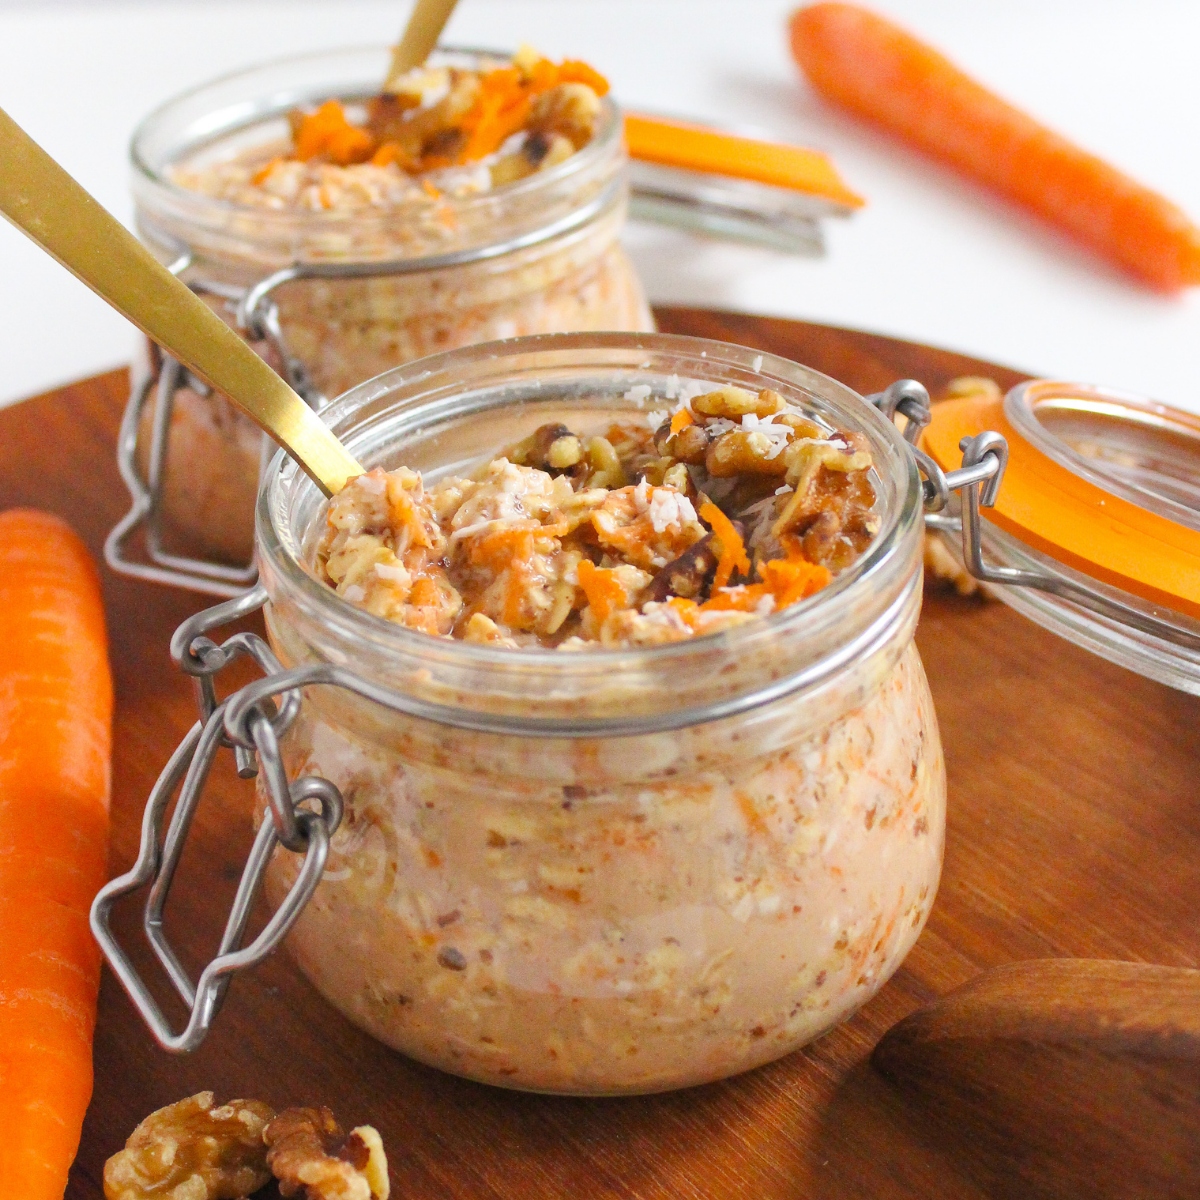 https://www.fannetasticfood.com/wp-content/uploads/2022/04/Carrot-Cake-Overnight-Oats-Featured-Image.png